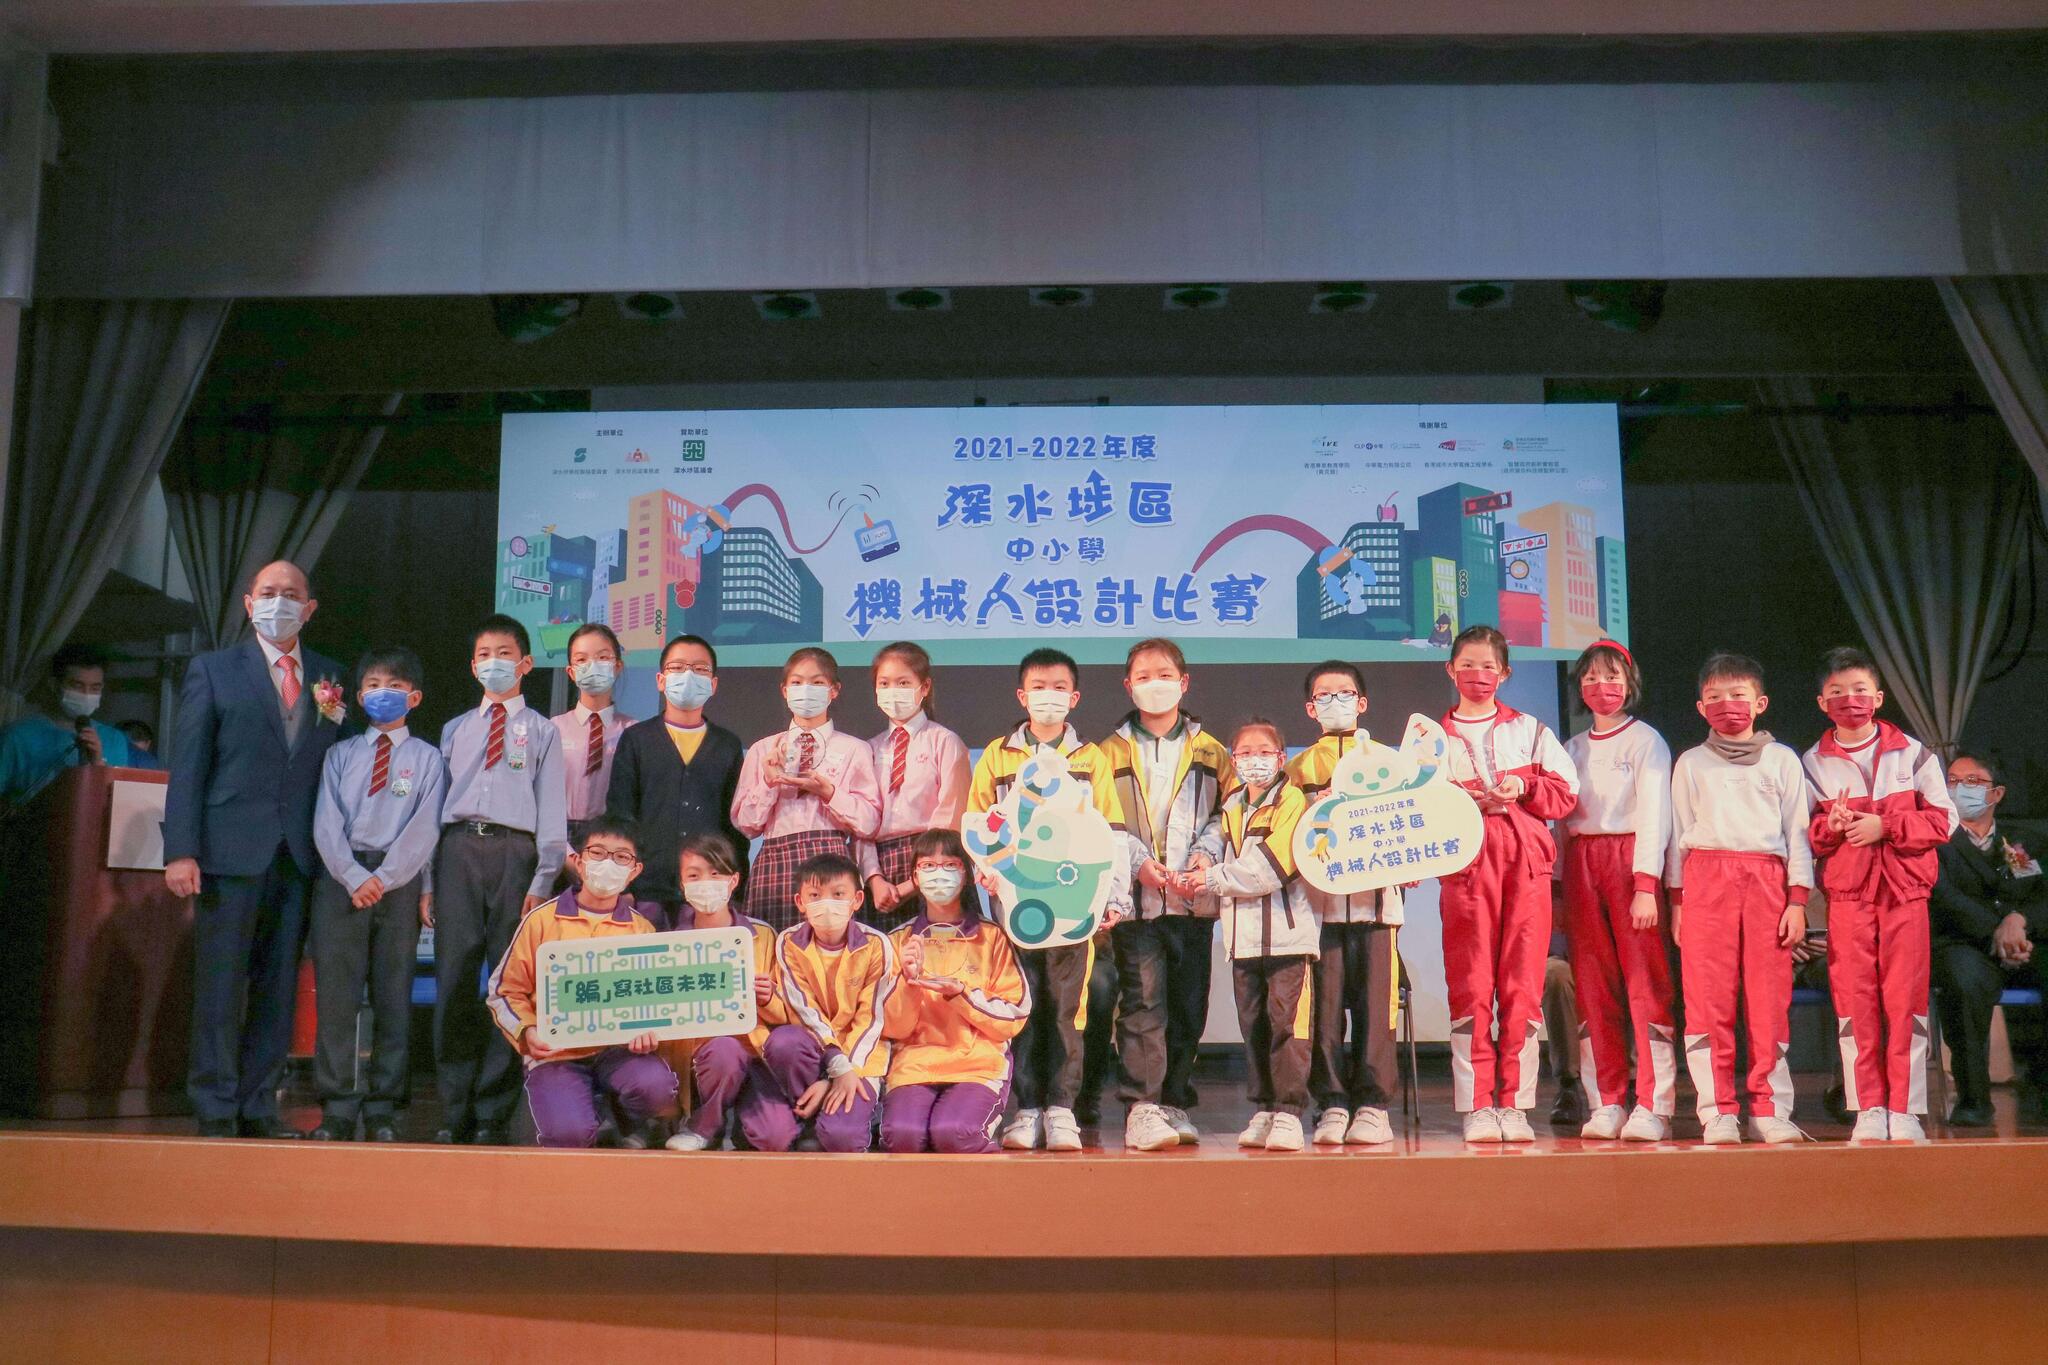 2021-2022 Sham Shui Po District Primary and Secondary School Robot Design Competition